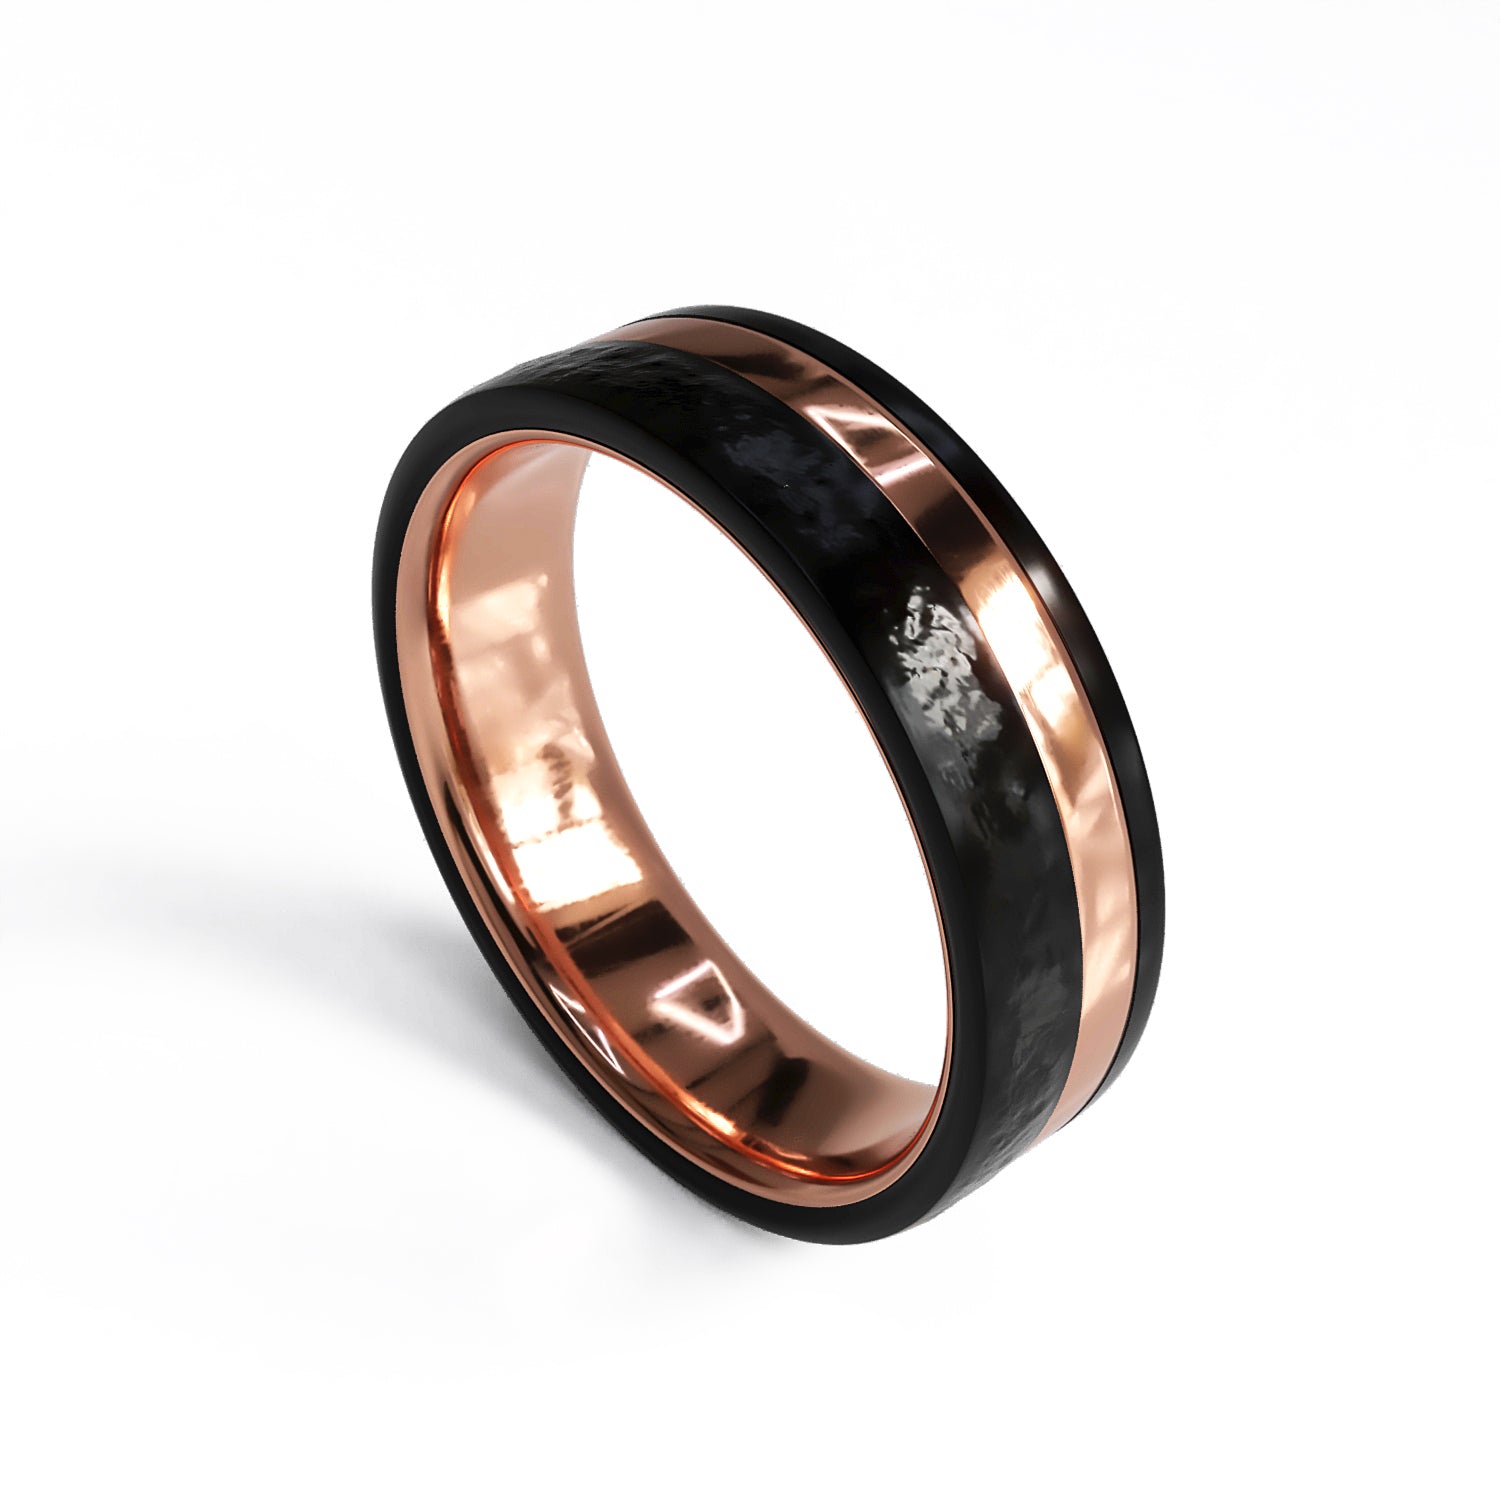 Hammered Two-Tone Wedding Ring - Boutee